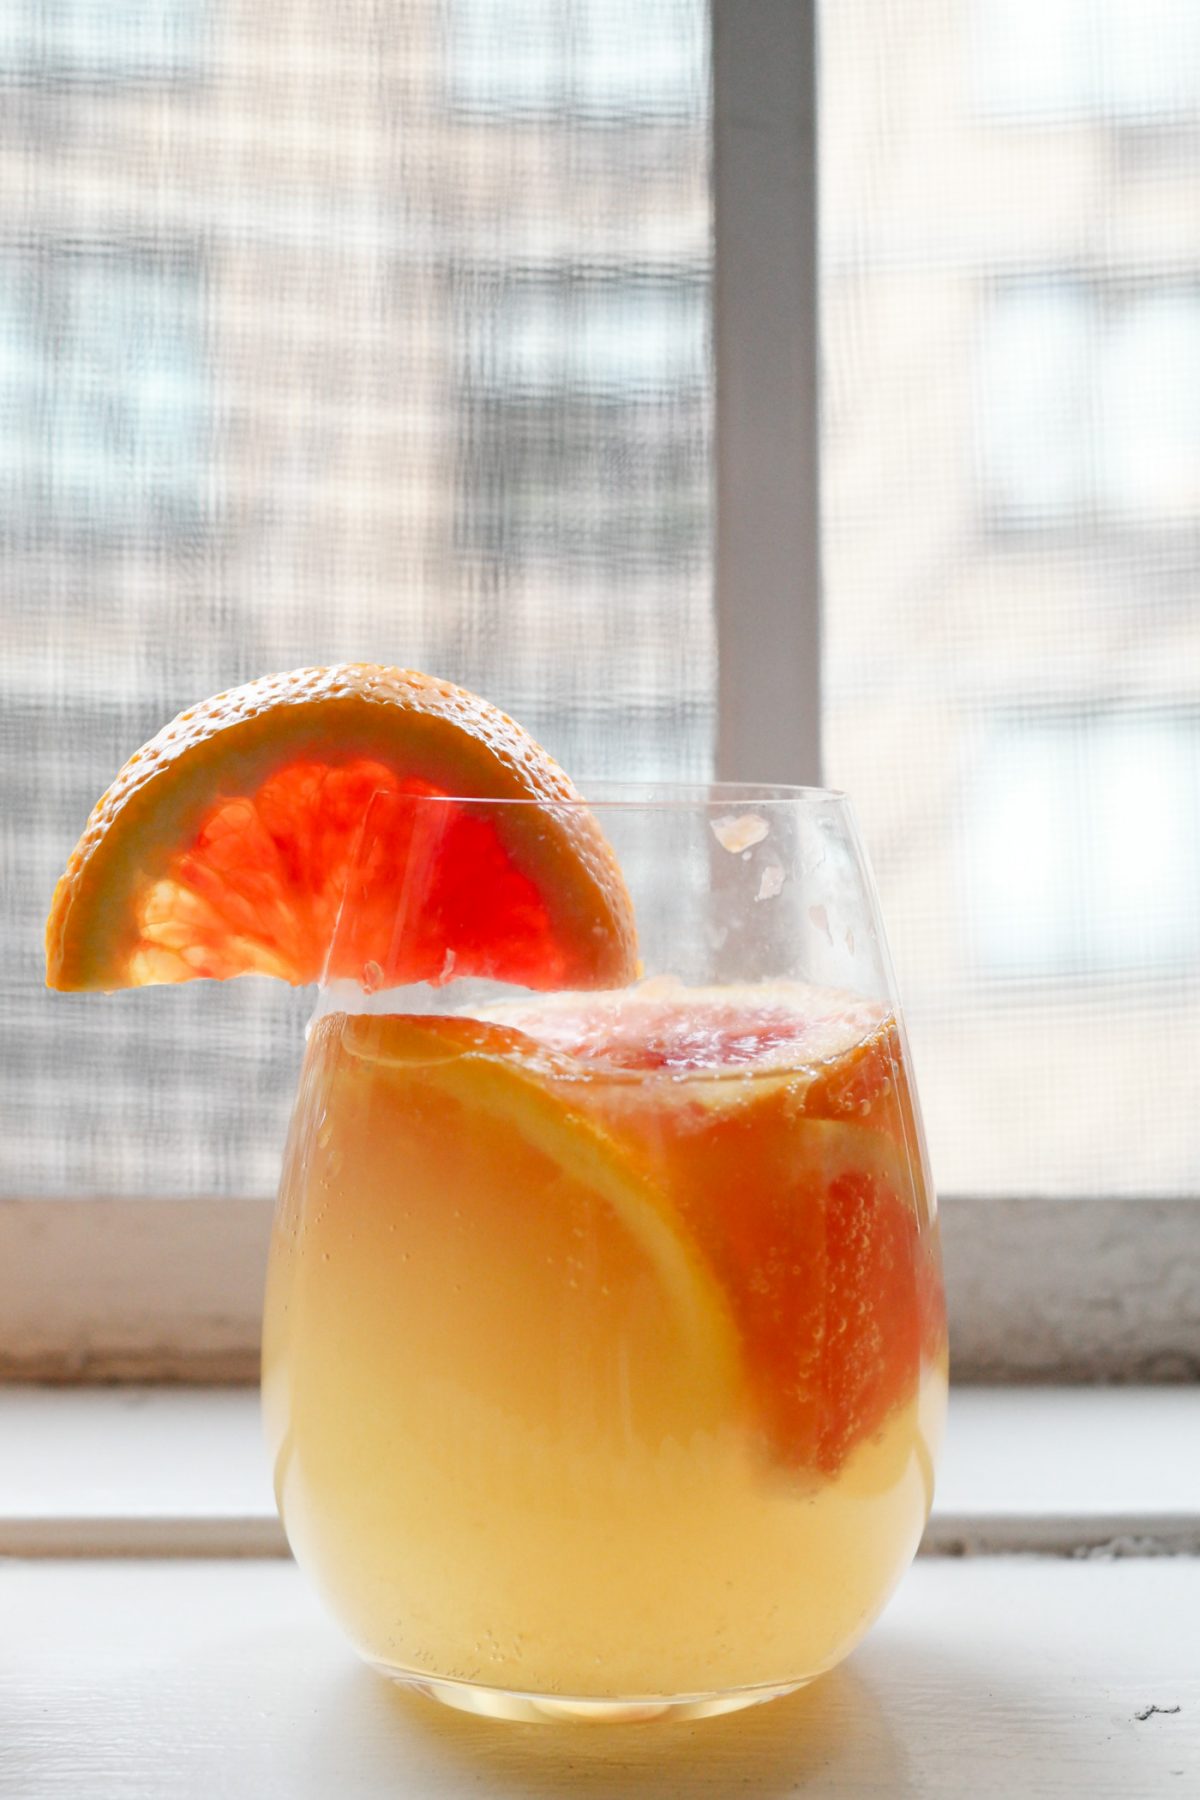 LOOK AT THAT GLASS! SO BRIGHT AND COLORFUL AND DELICIOUS. and just make this white citrus sangria because YUM. | thepikeplacekitchen.com